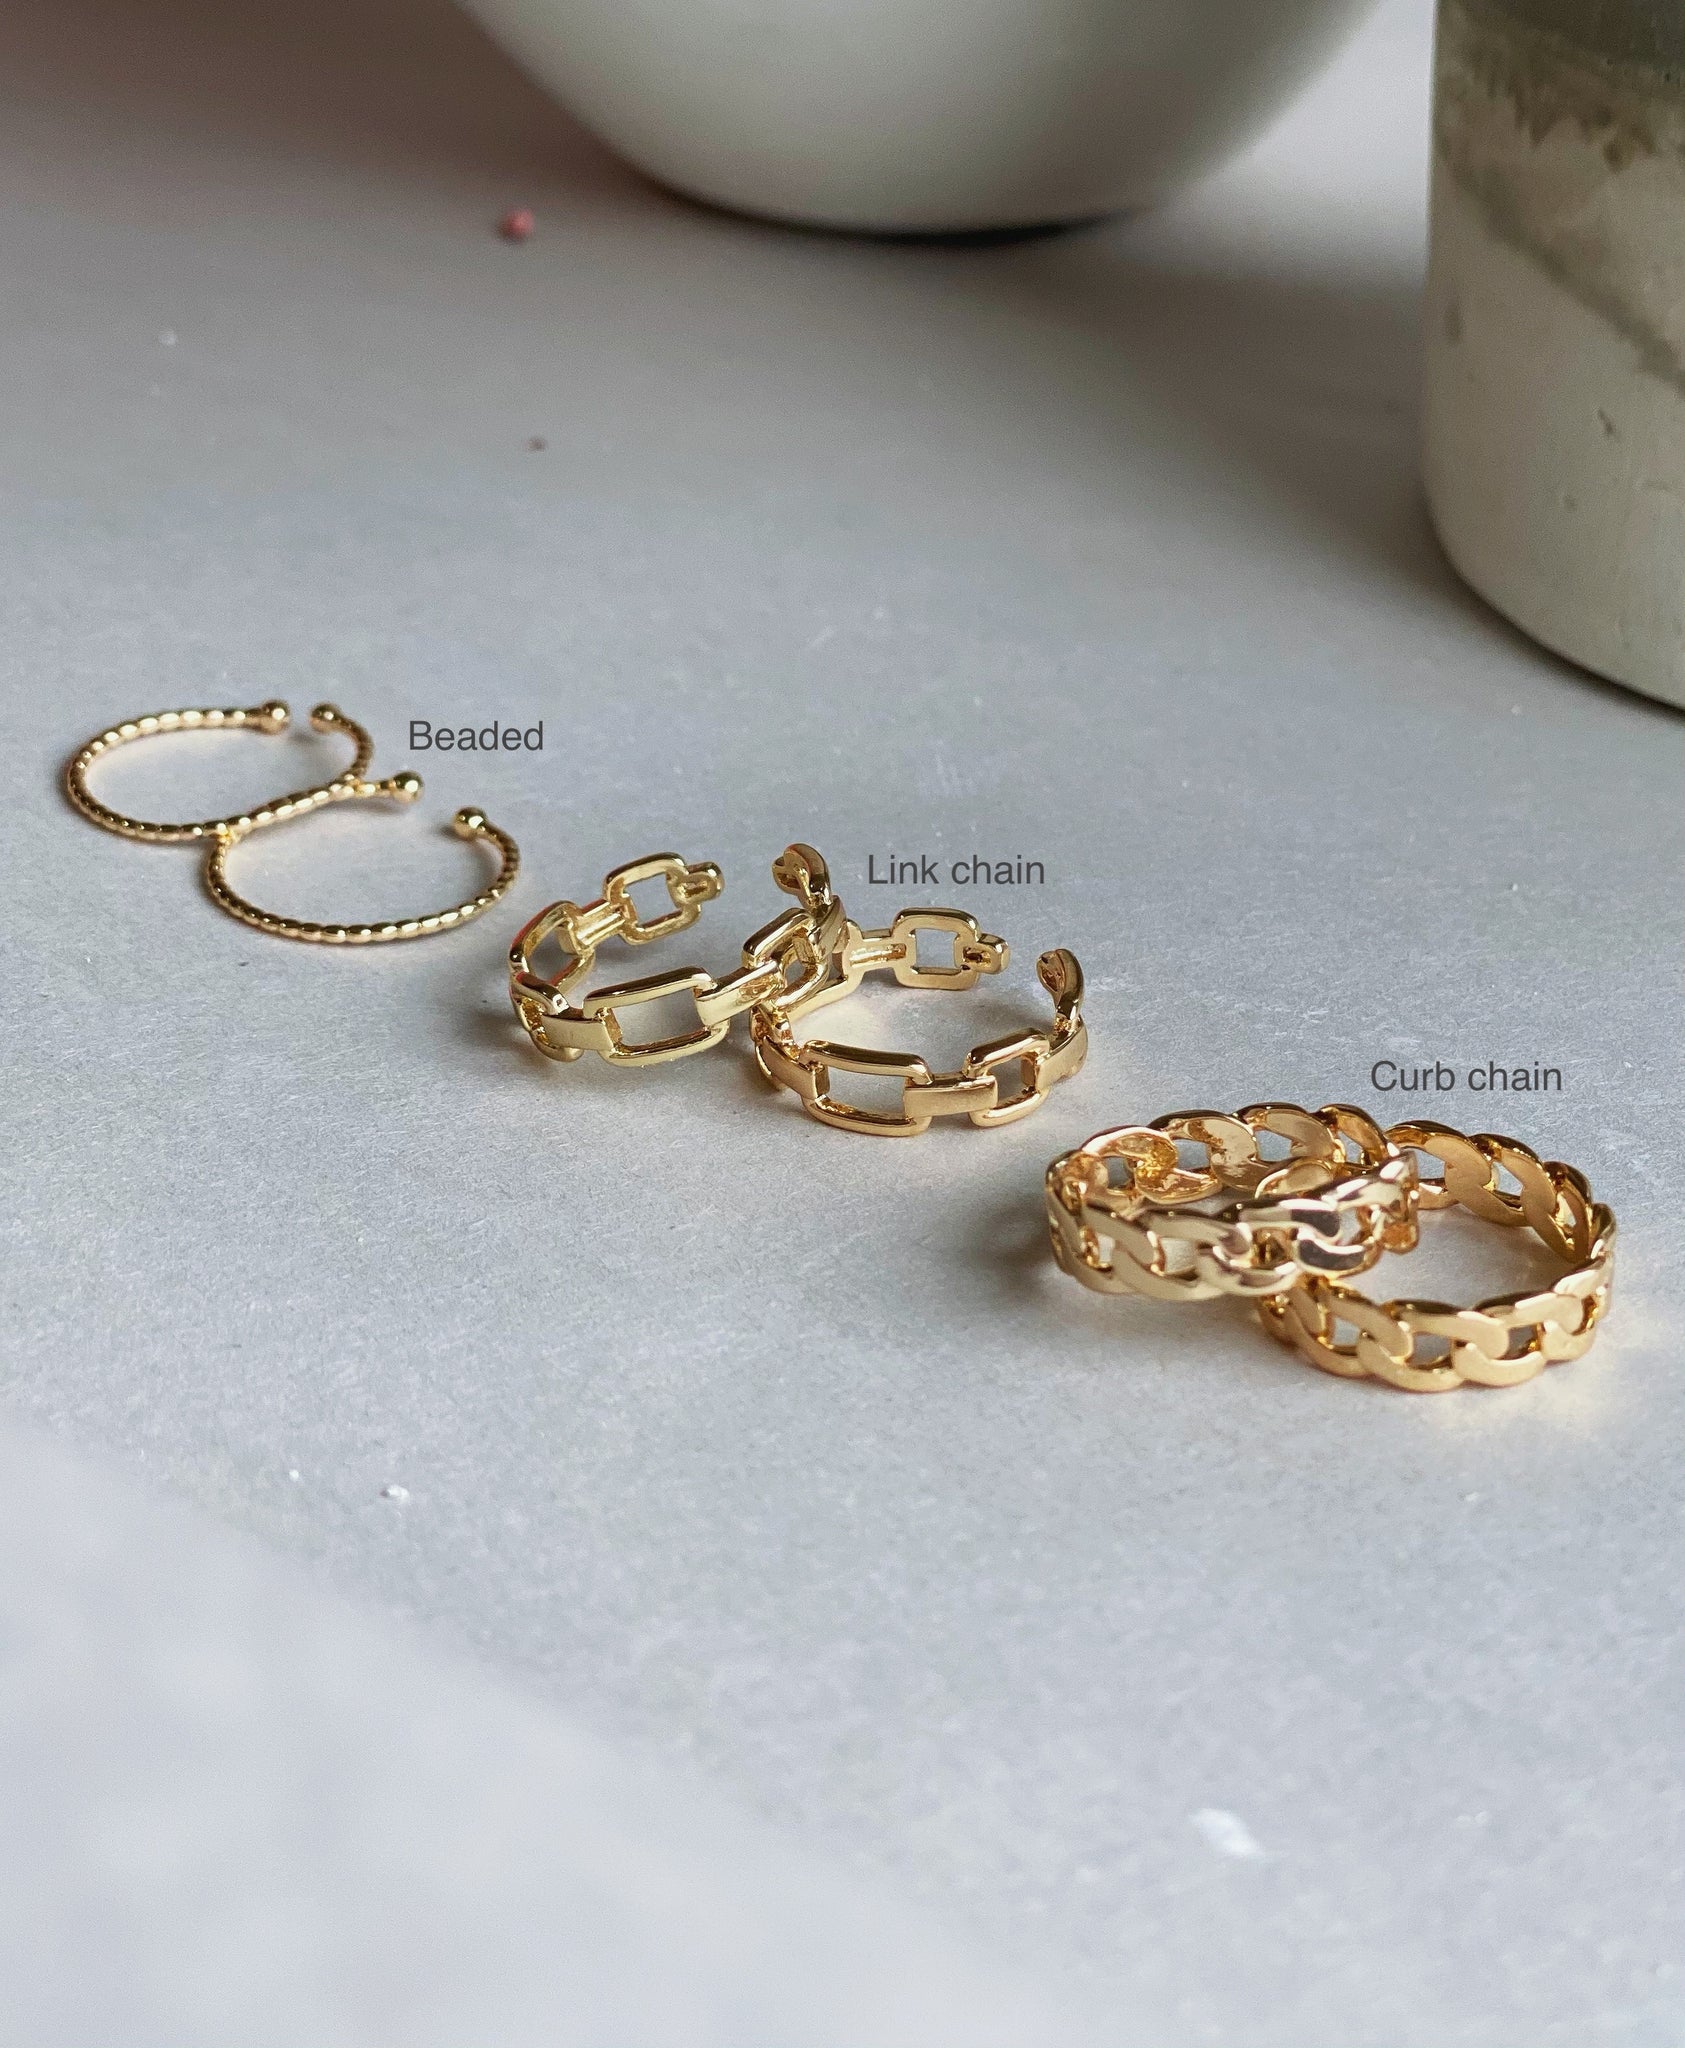 Statement Chain Rings